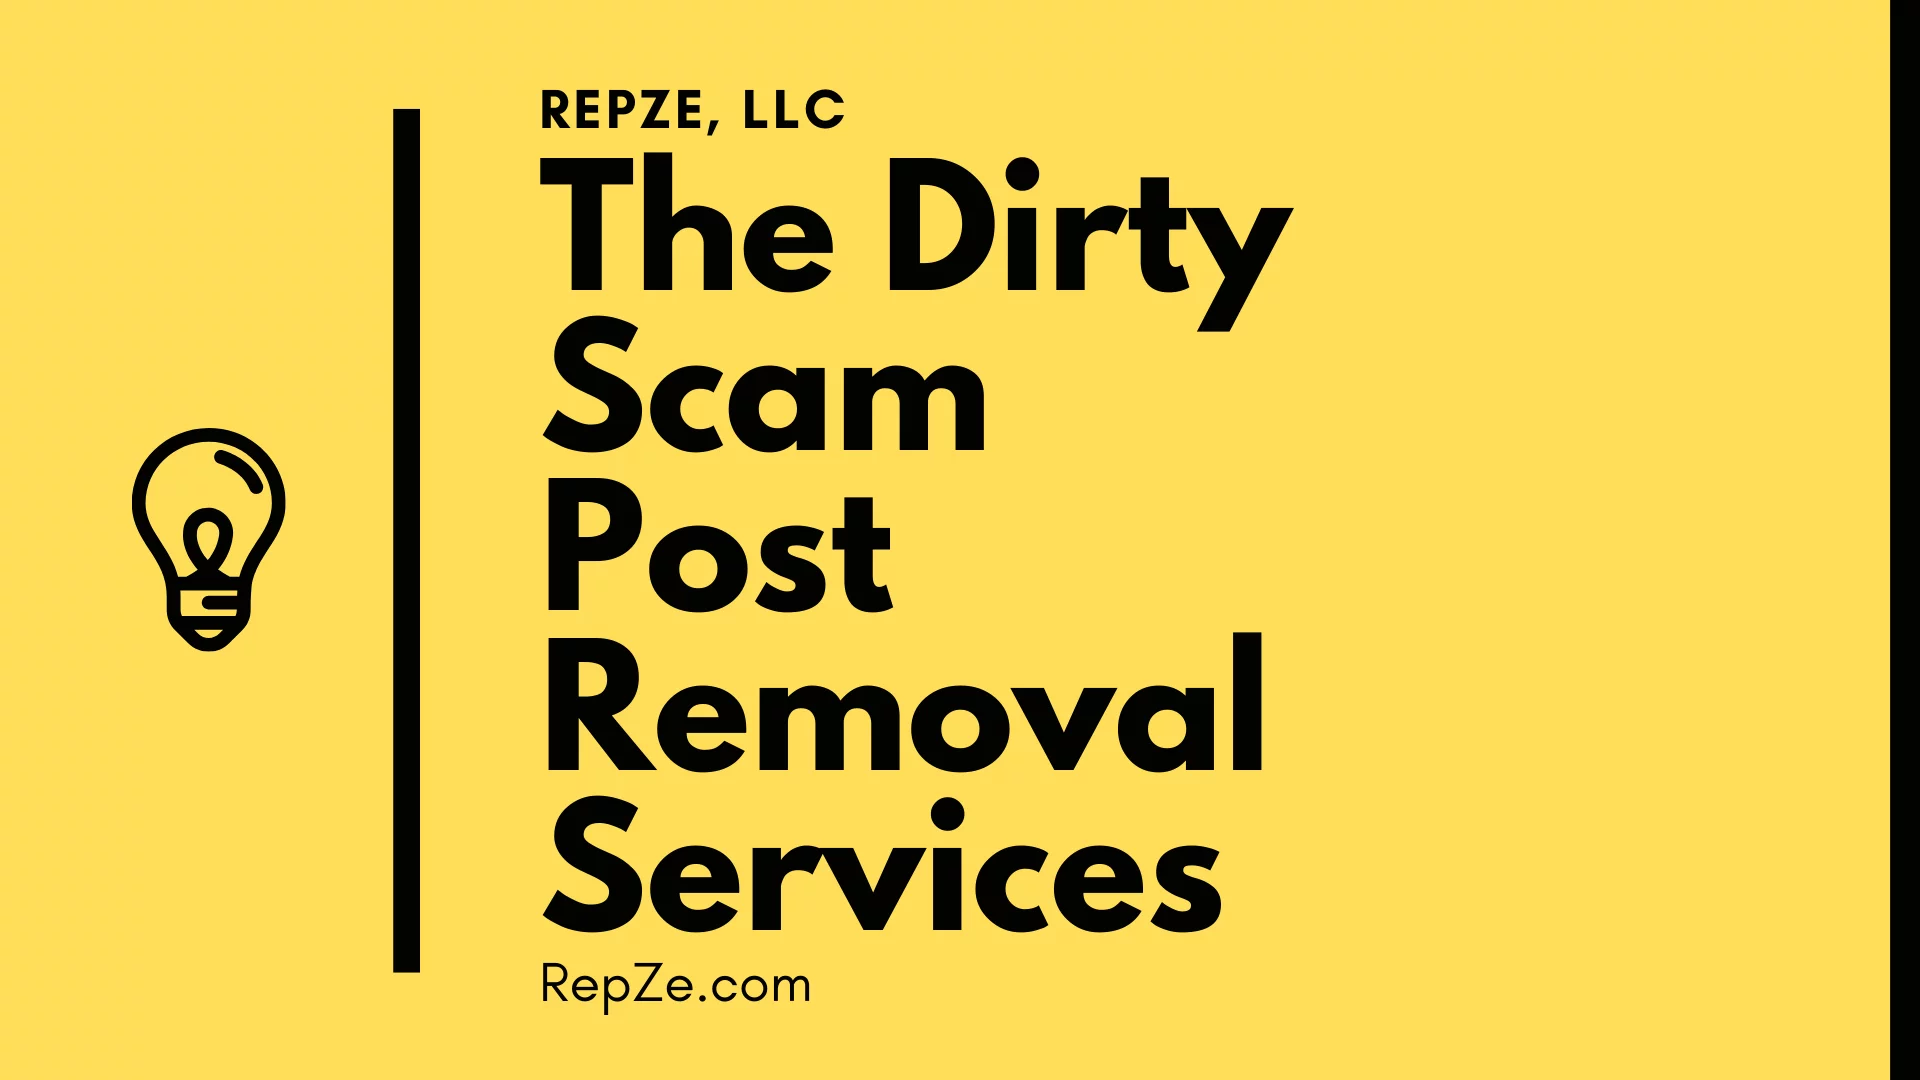 Dirtyscam.com Post Removal Services From Dirty Scam